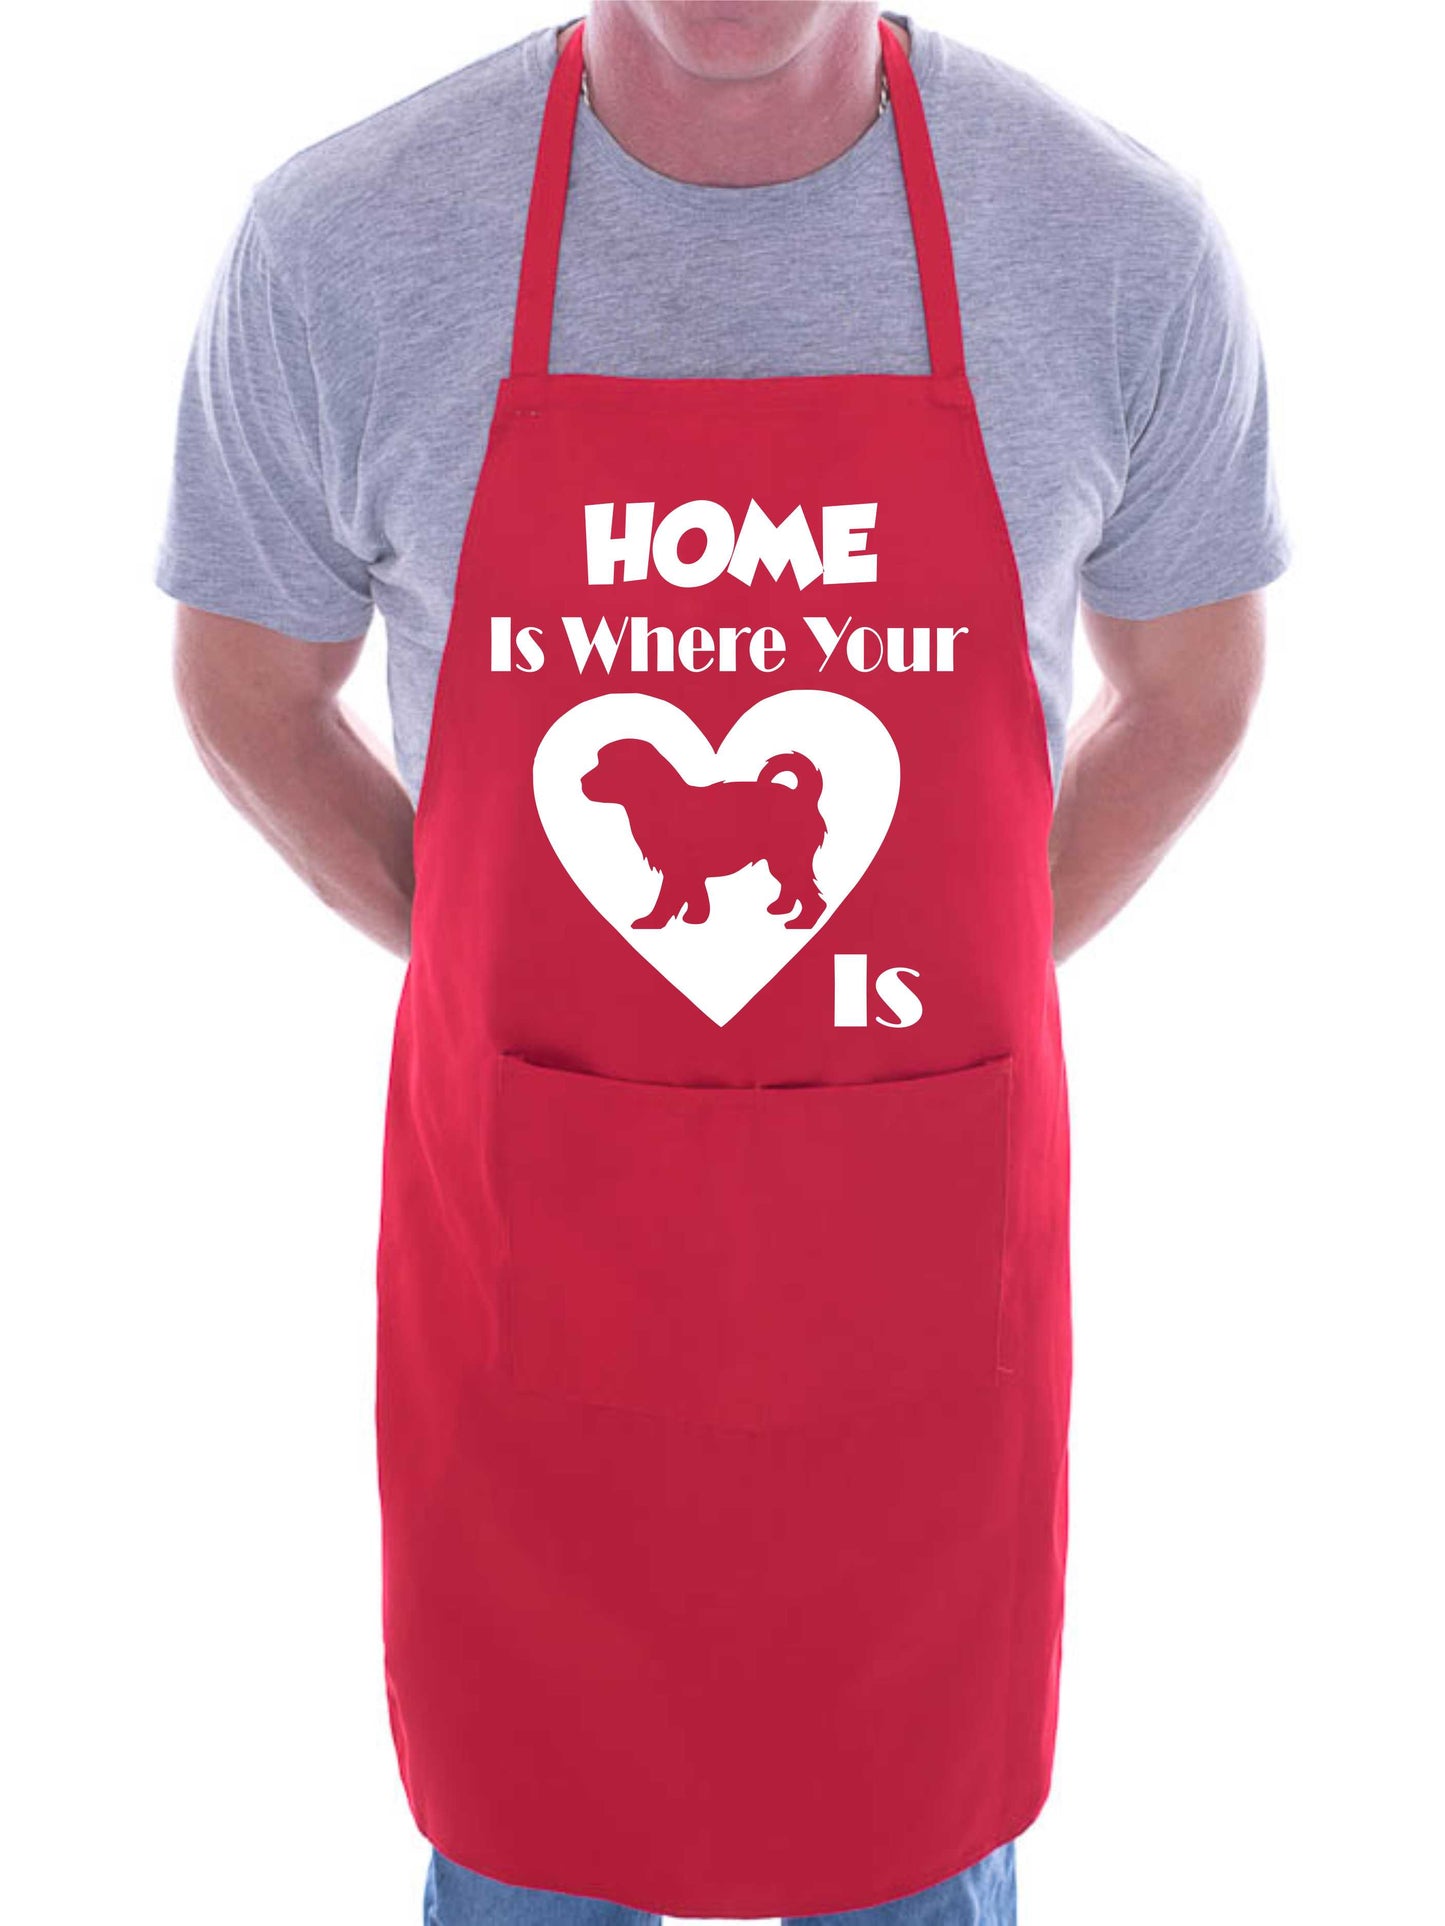 Home Is Where Your Cavachon Is Funny Dog Lover Gift Novelty Cooking BBQ Apron